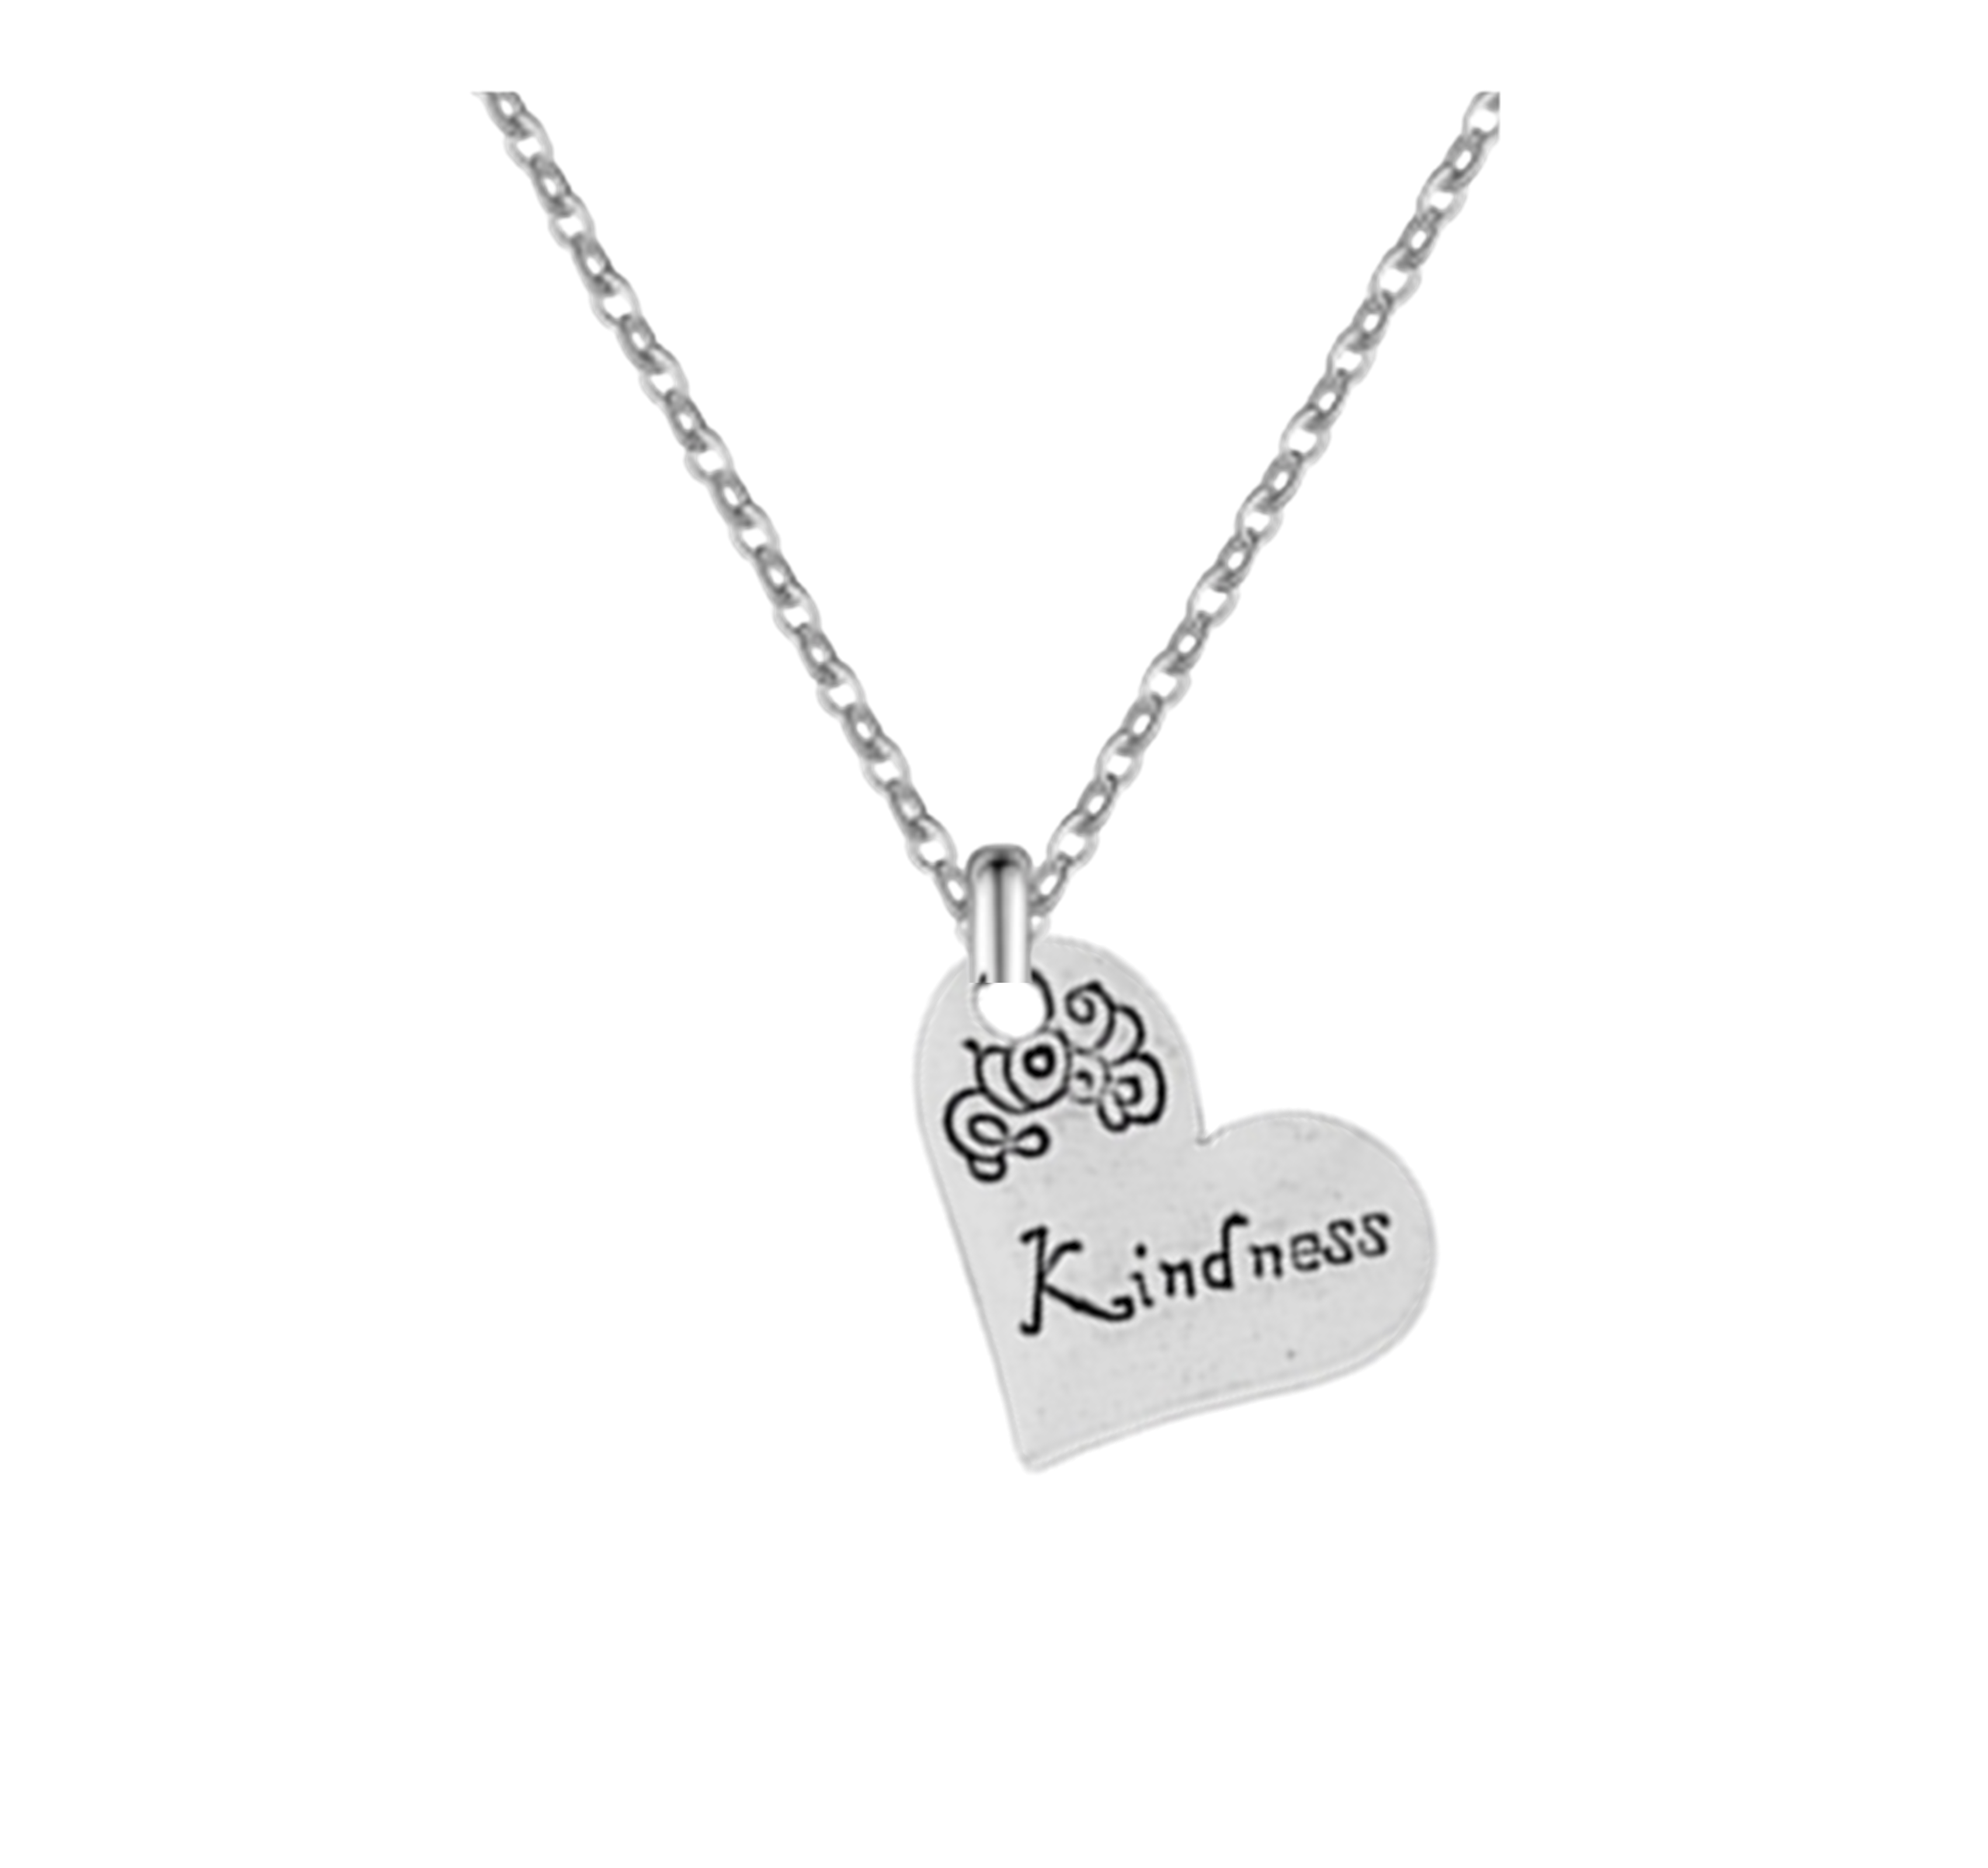 Fruits of the Spirit Necklace (Kindness)